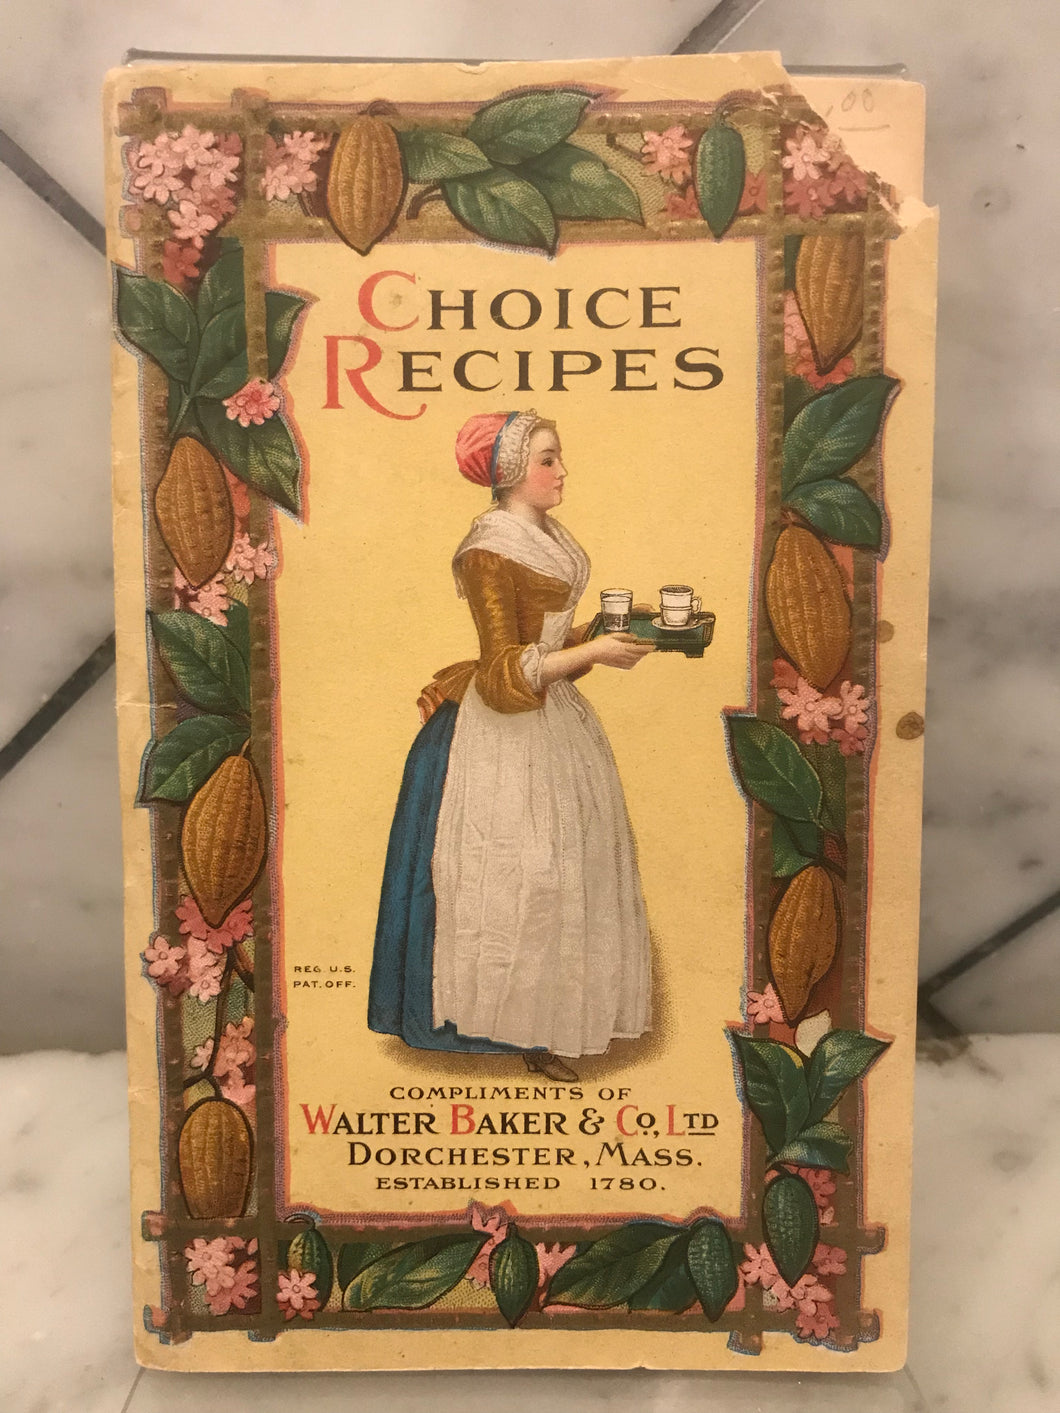 Choice Recipes, Compliments of Walter Baker & Co. Ltd.